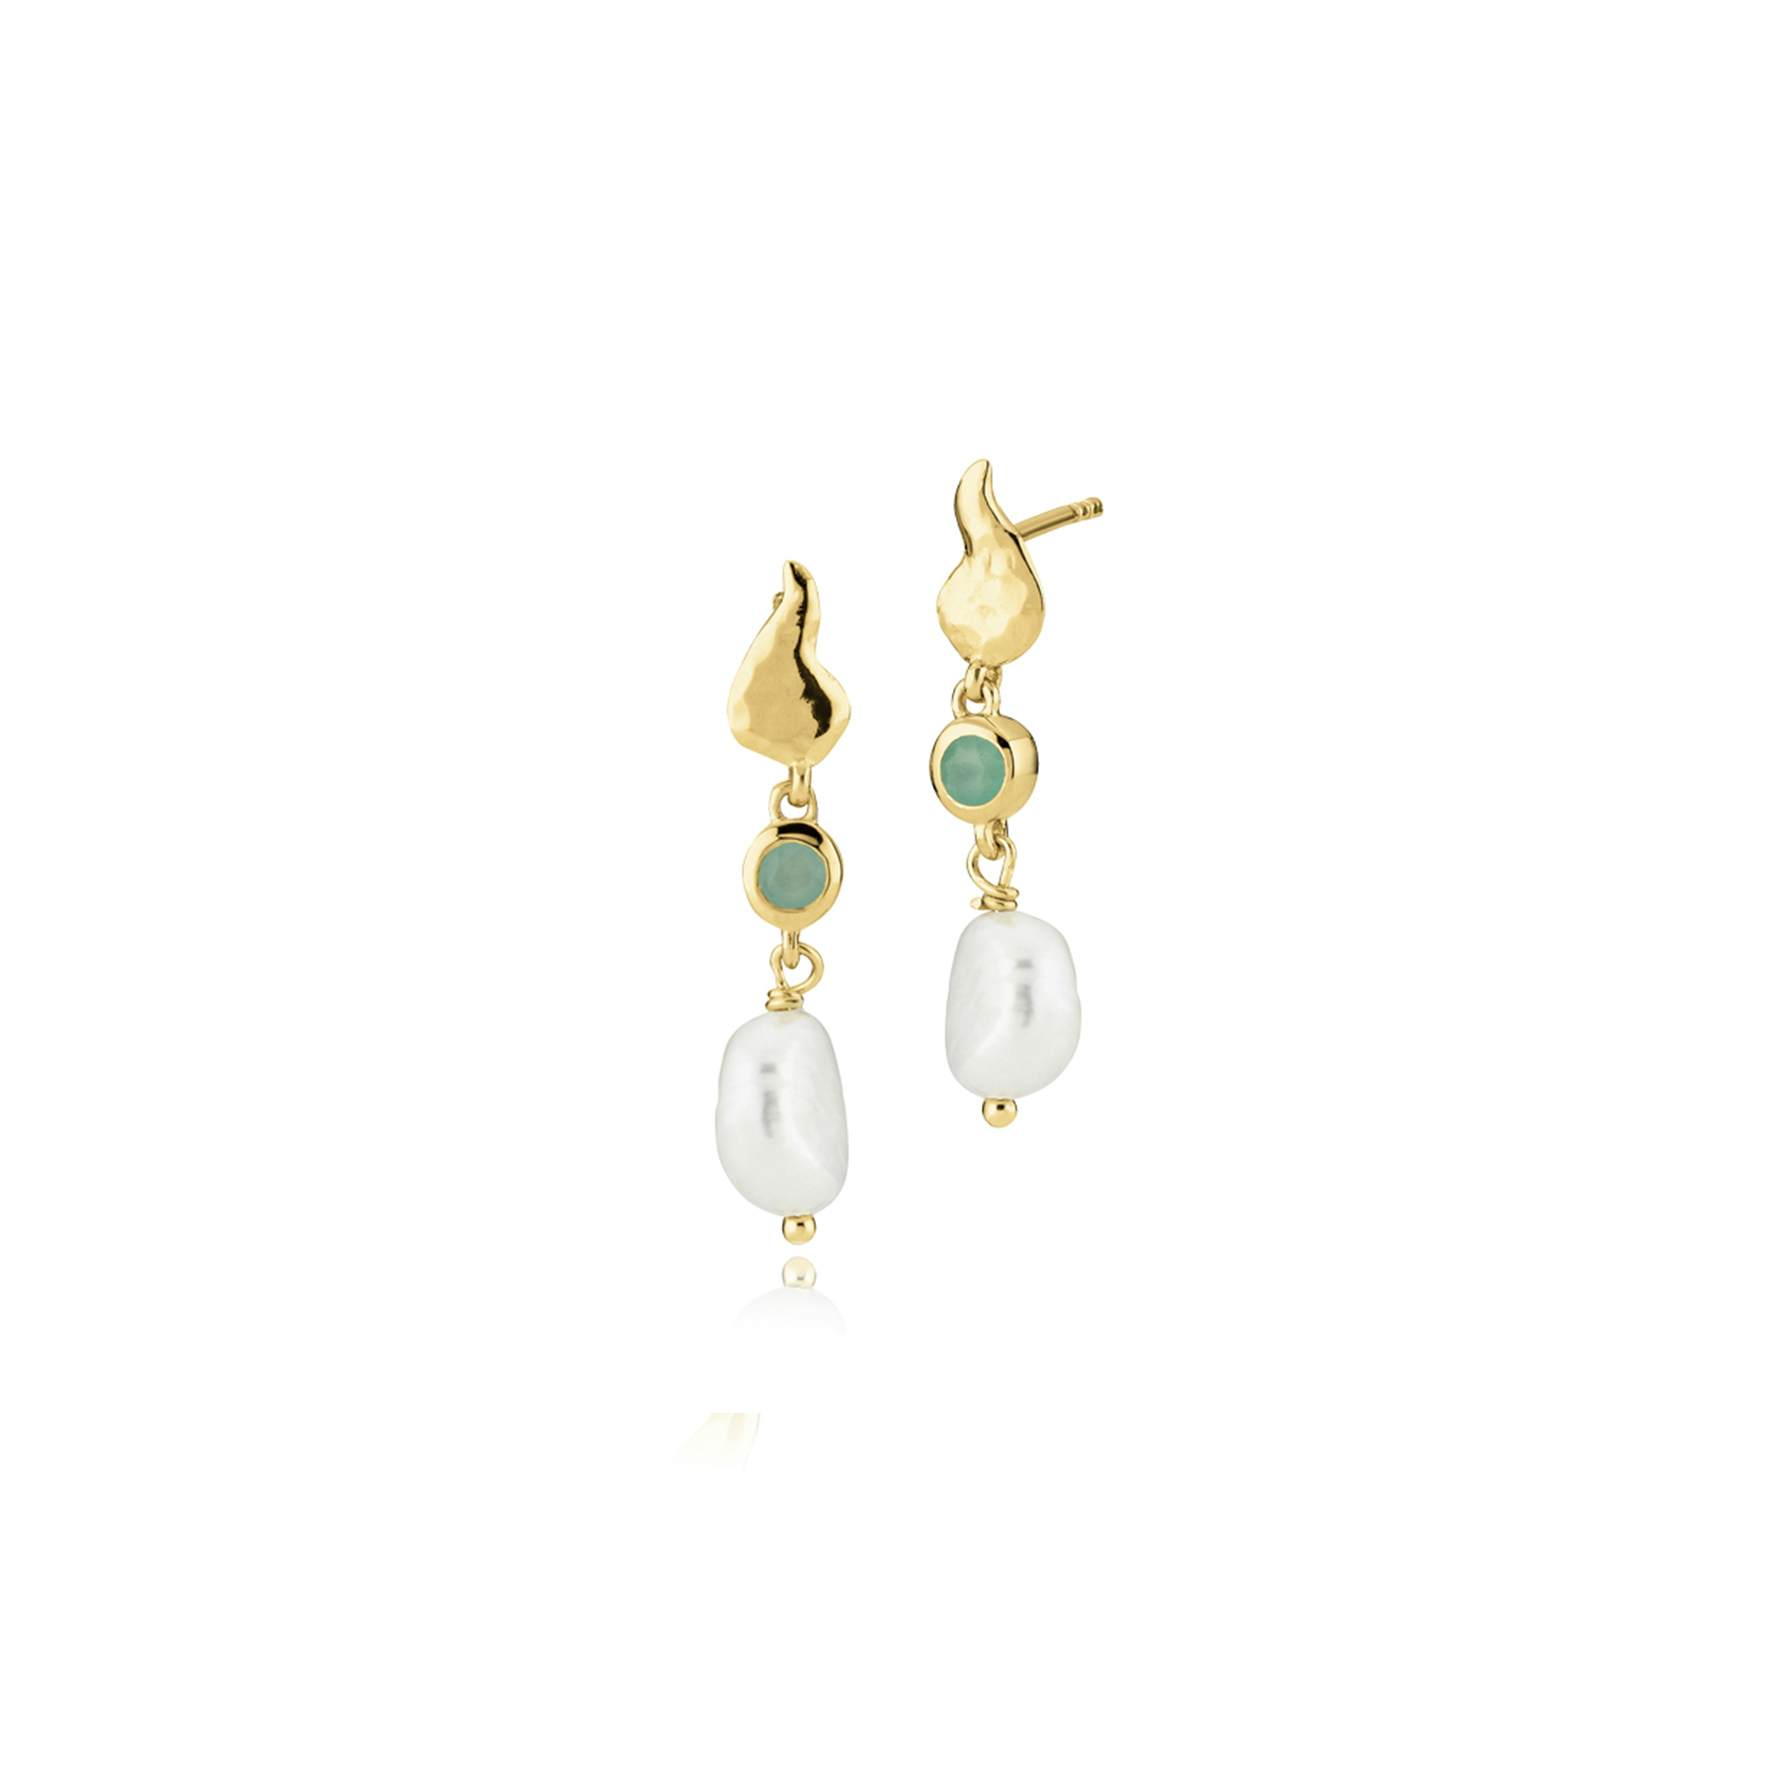 Leonora Earrings With Pearl And Green Stone fra Izabel Camille i Forgyldt-Sølv Sterling 925